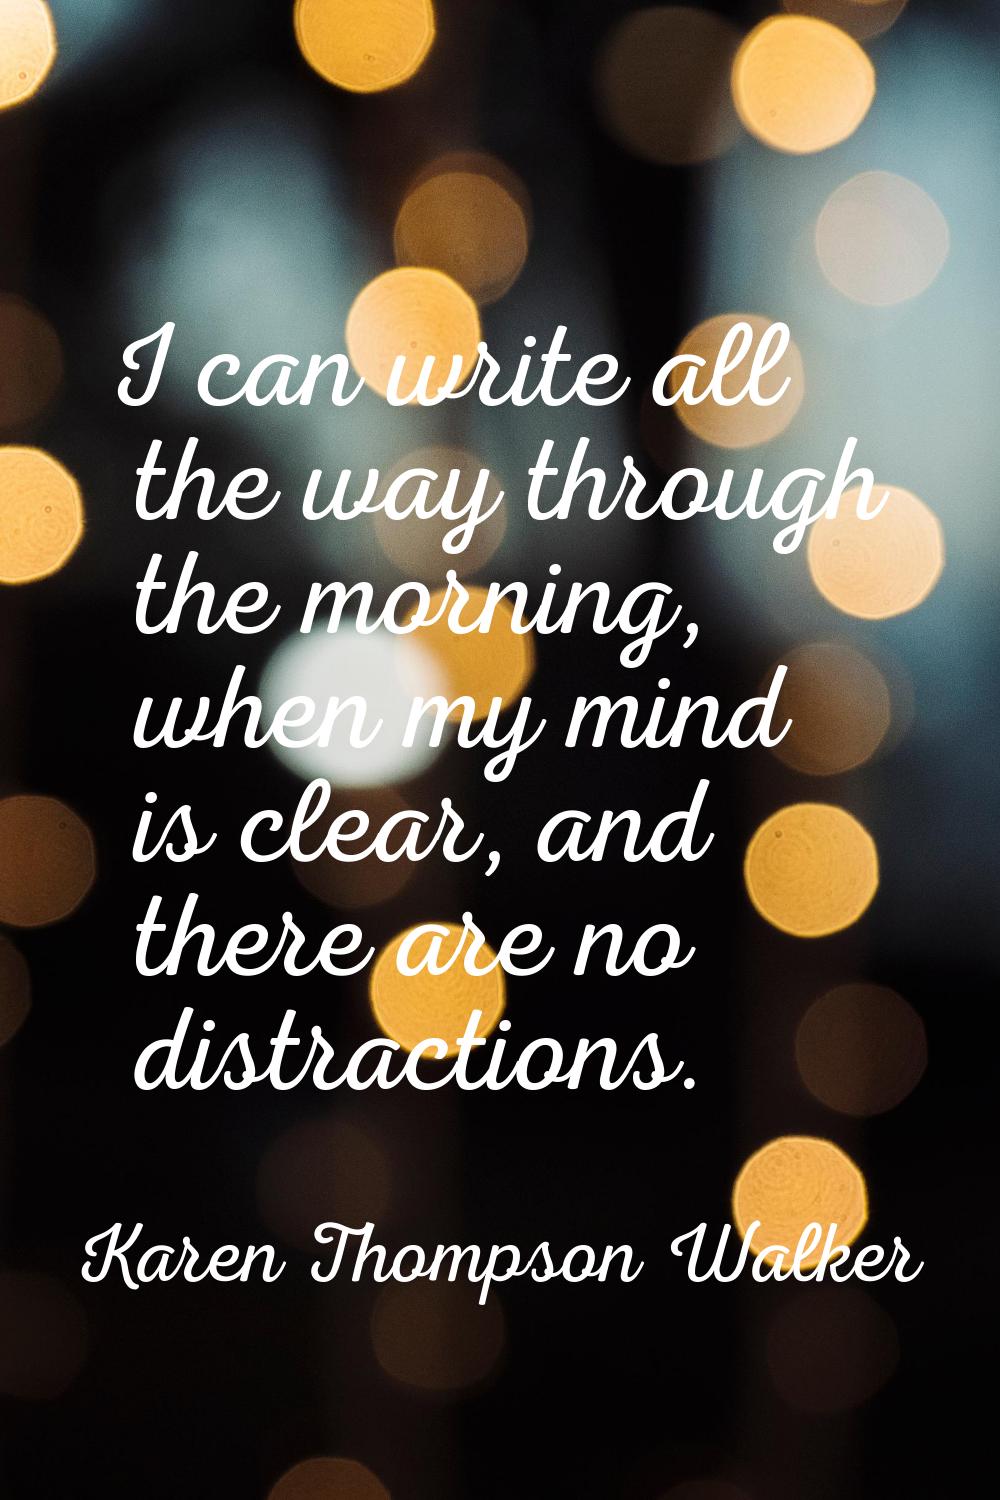 I can write all the way through the morning, when my mind is clear, and there are no distractions.